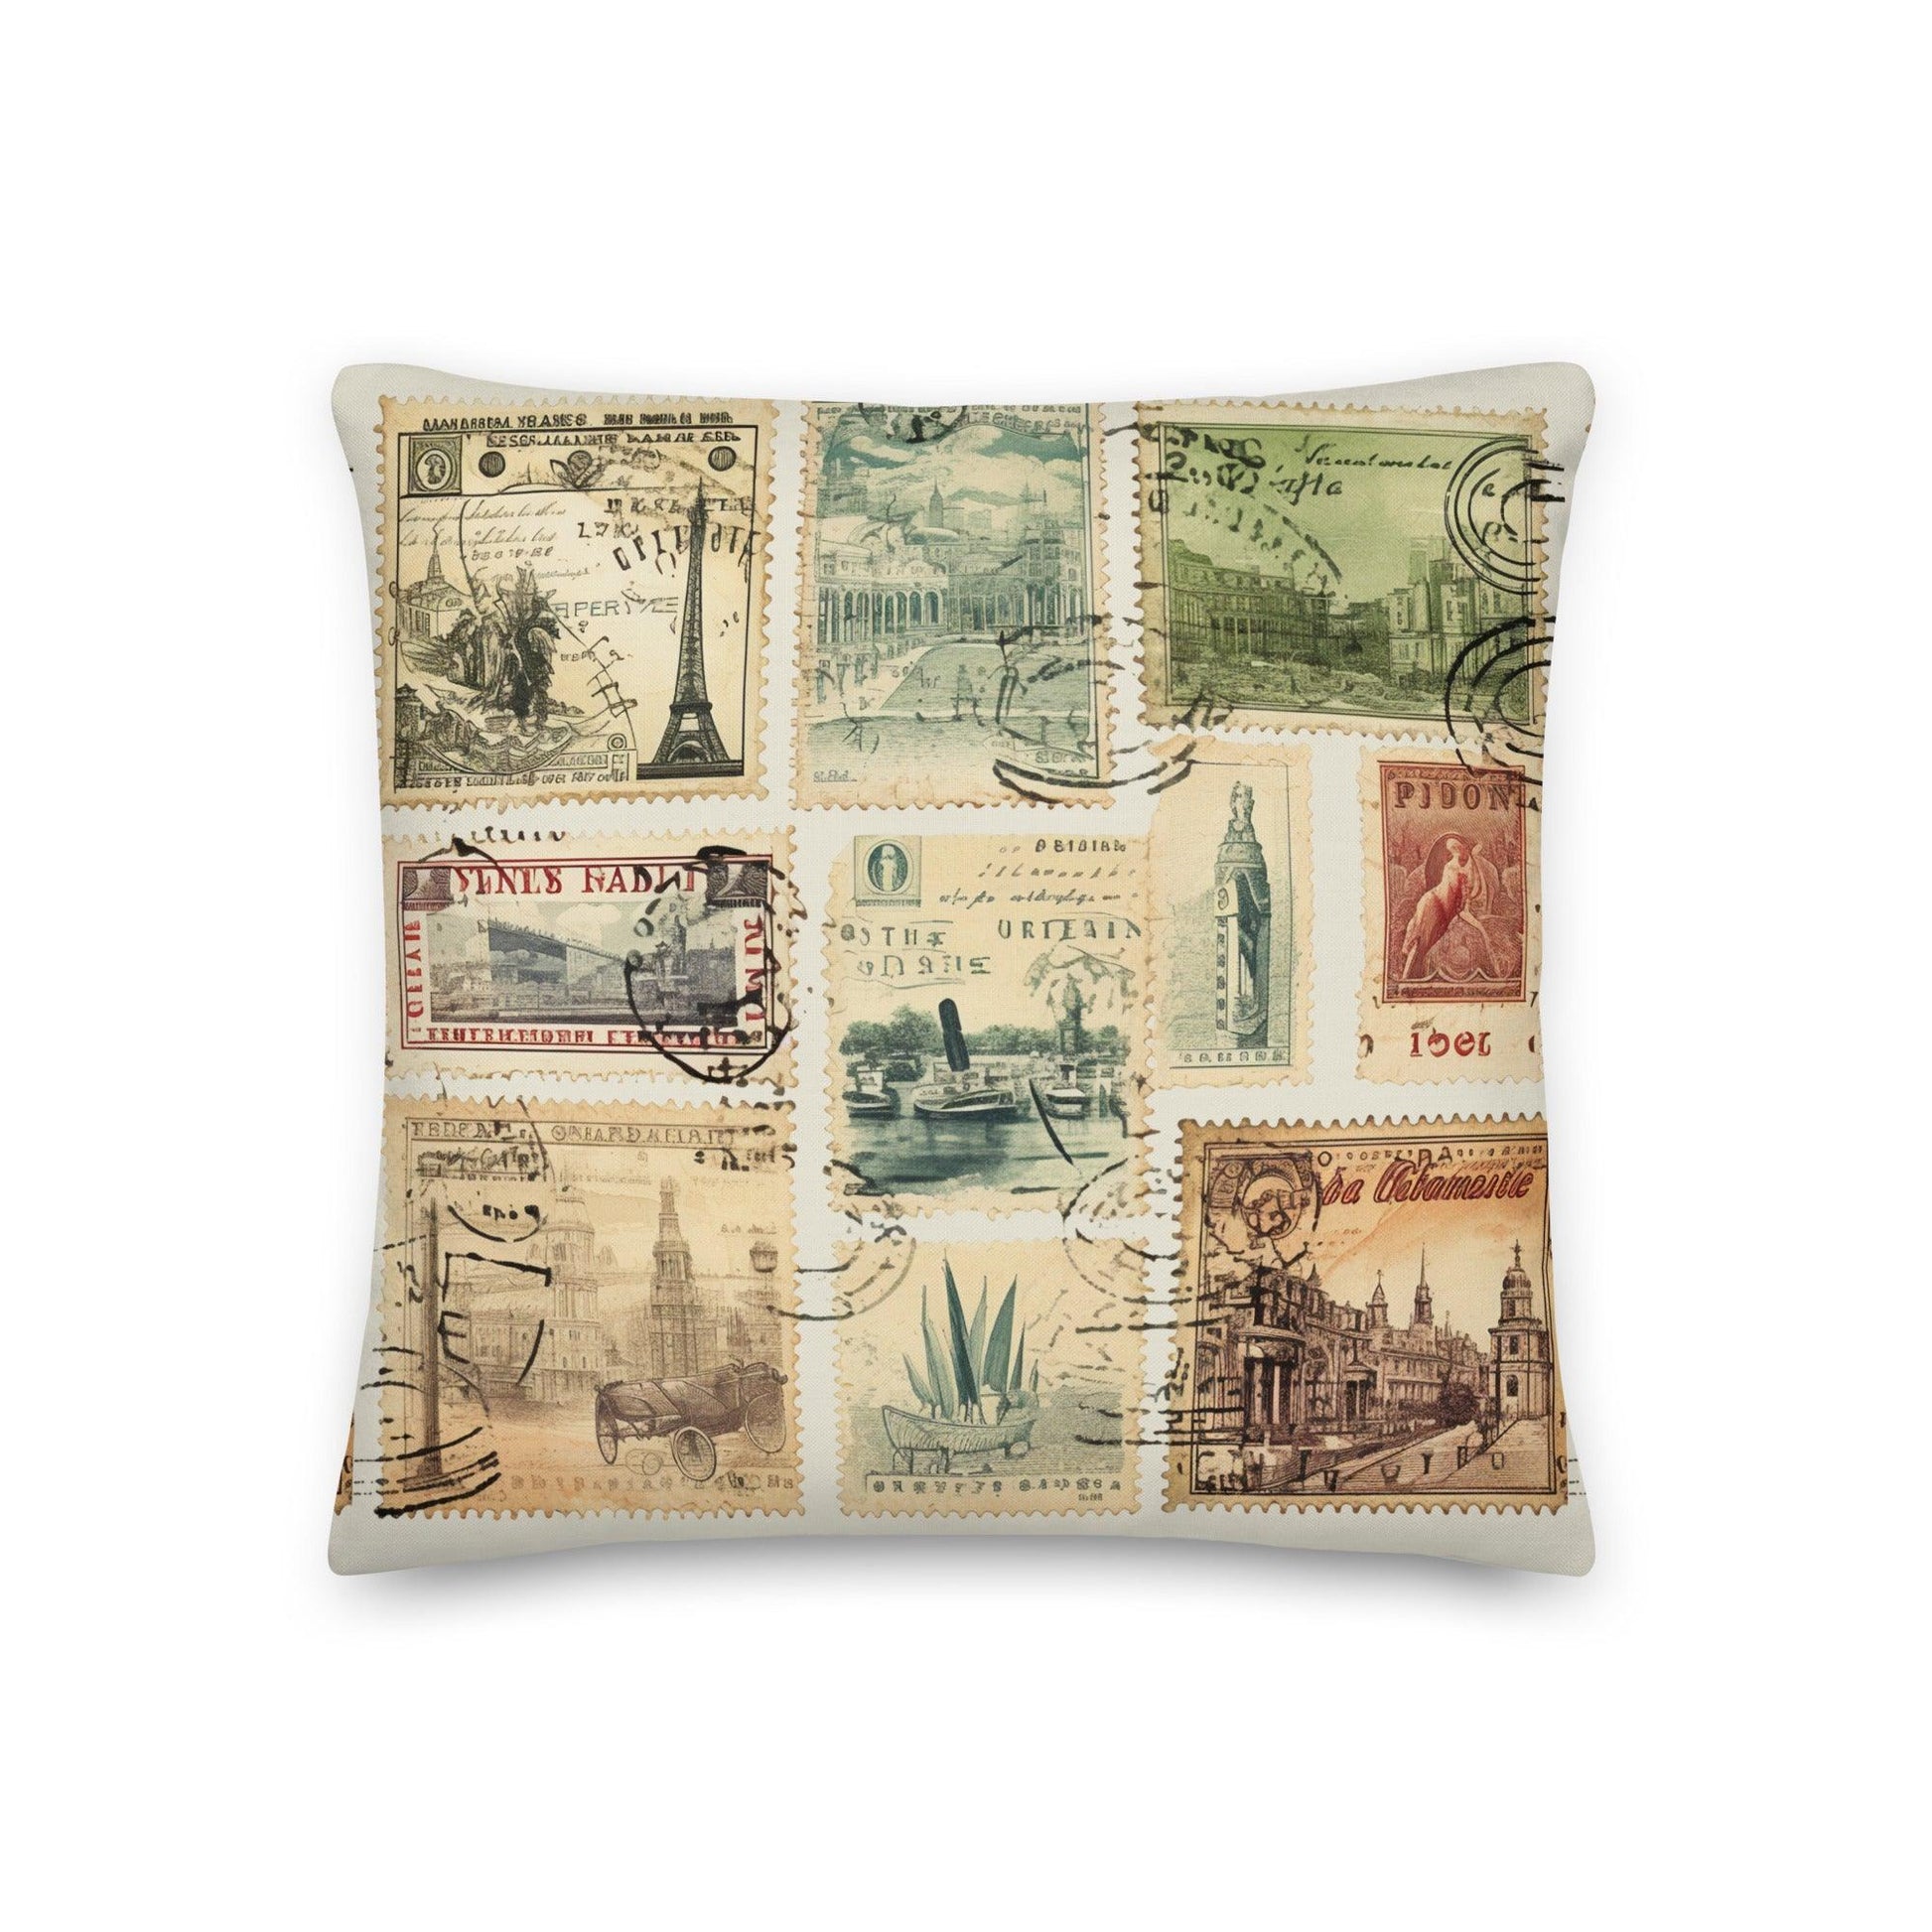 Vintage Travel Stamps Throw Pillow - The Global Wanderer